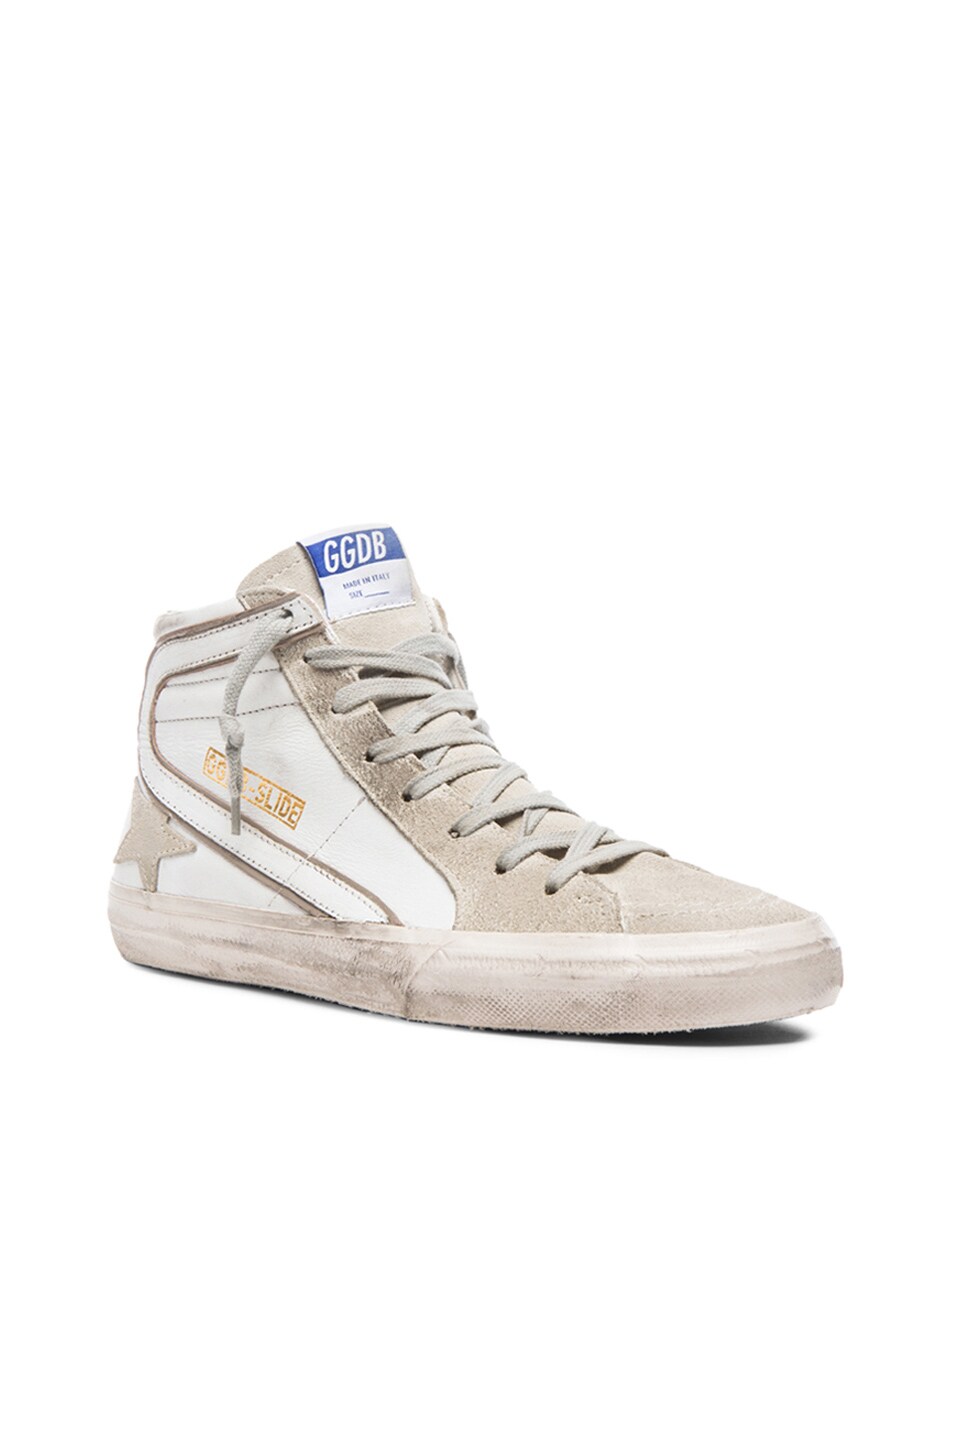 Image 1 of Golden Goose Slide Leather Sneakers in White Leather